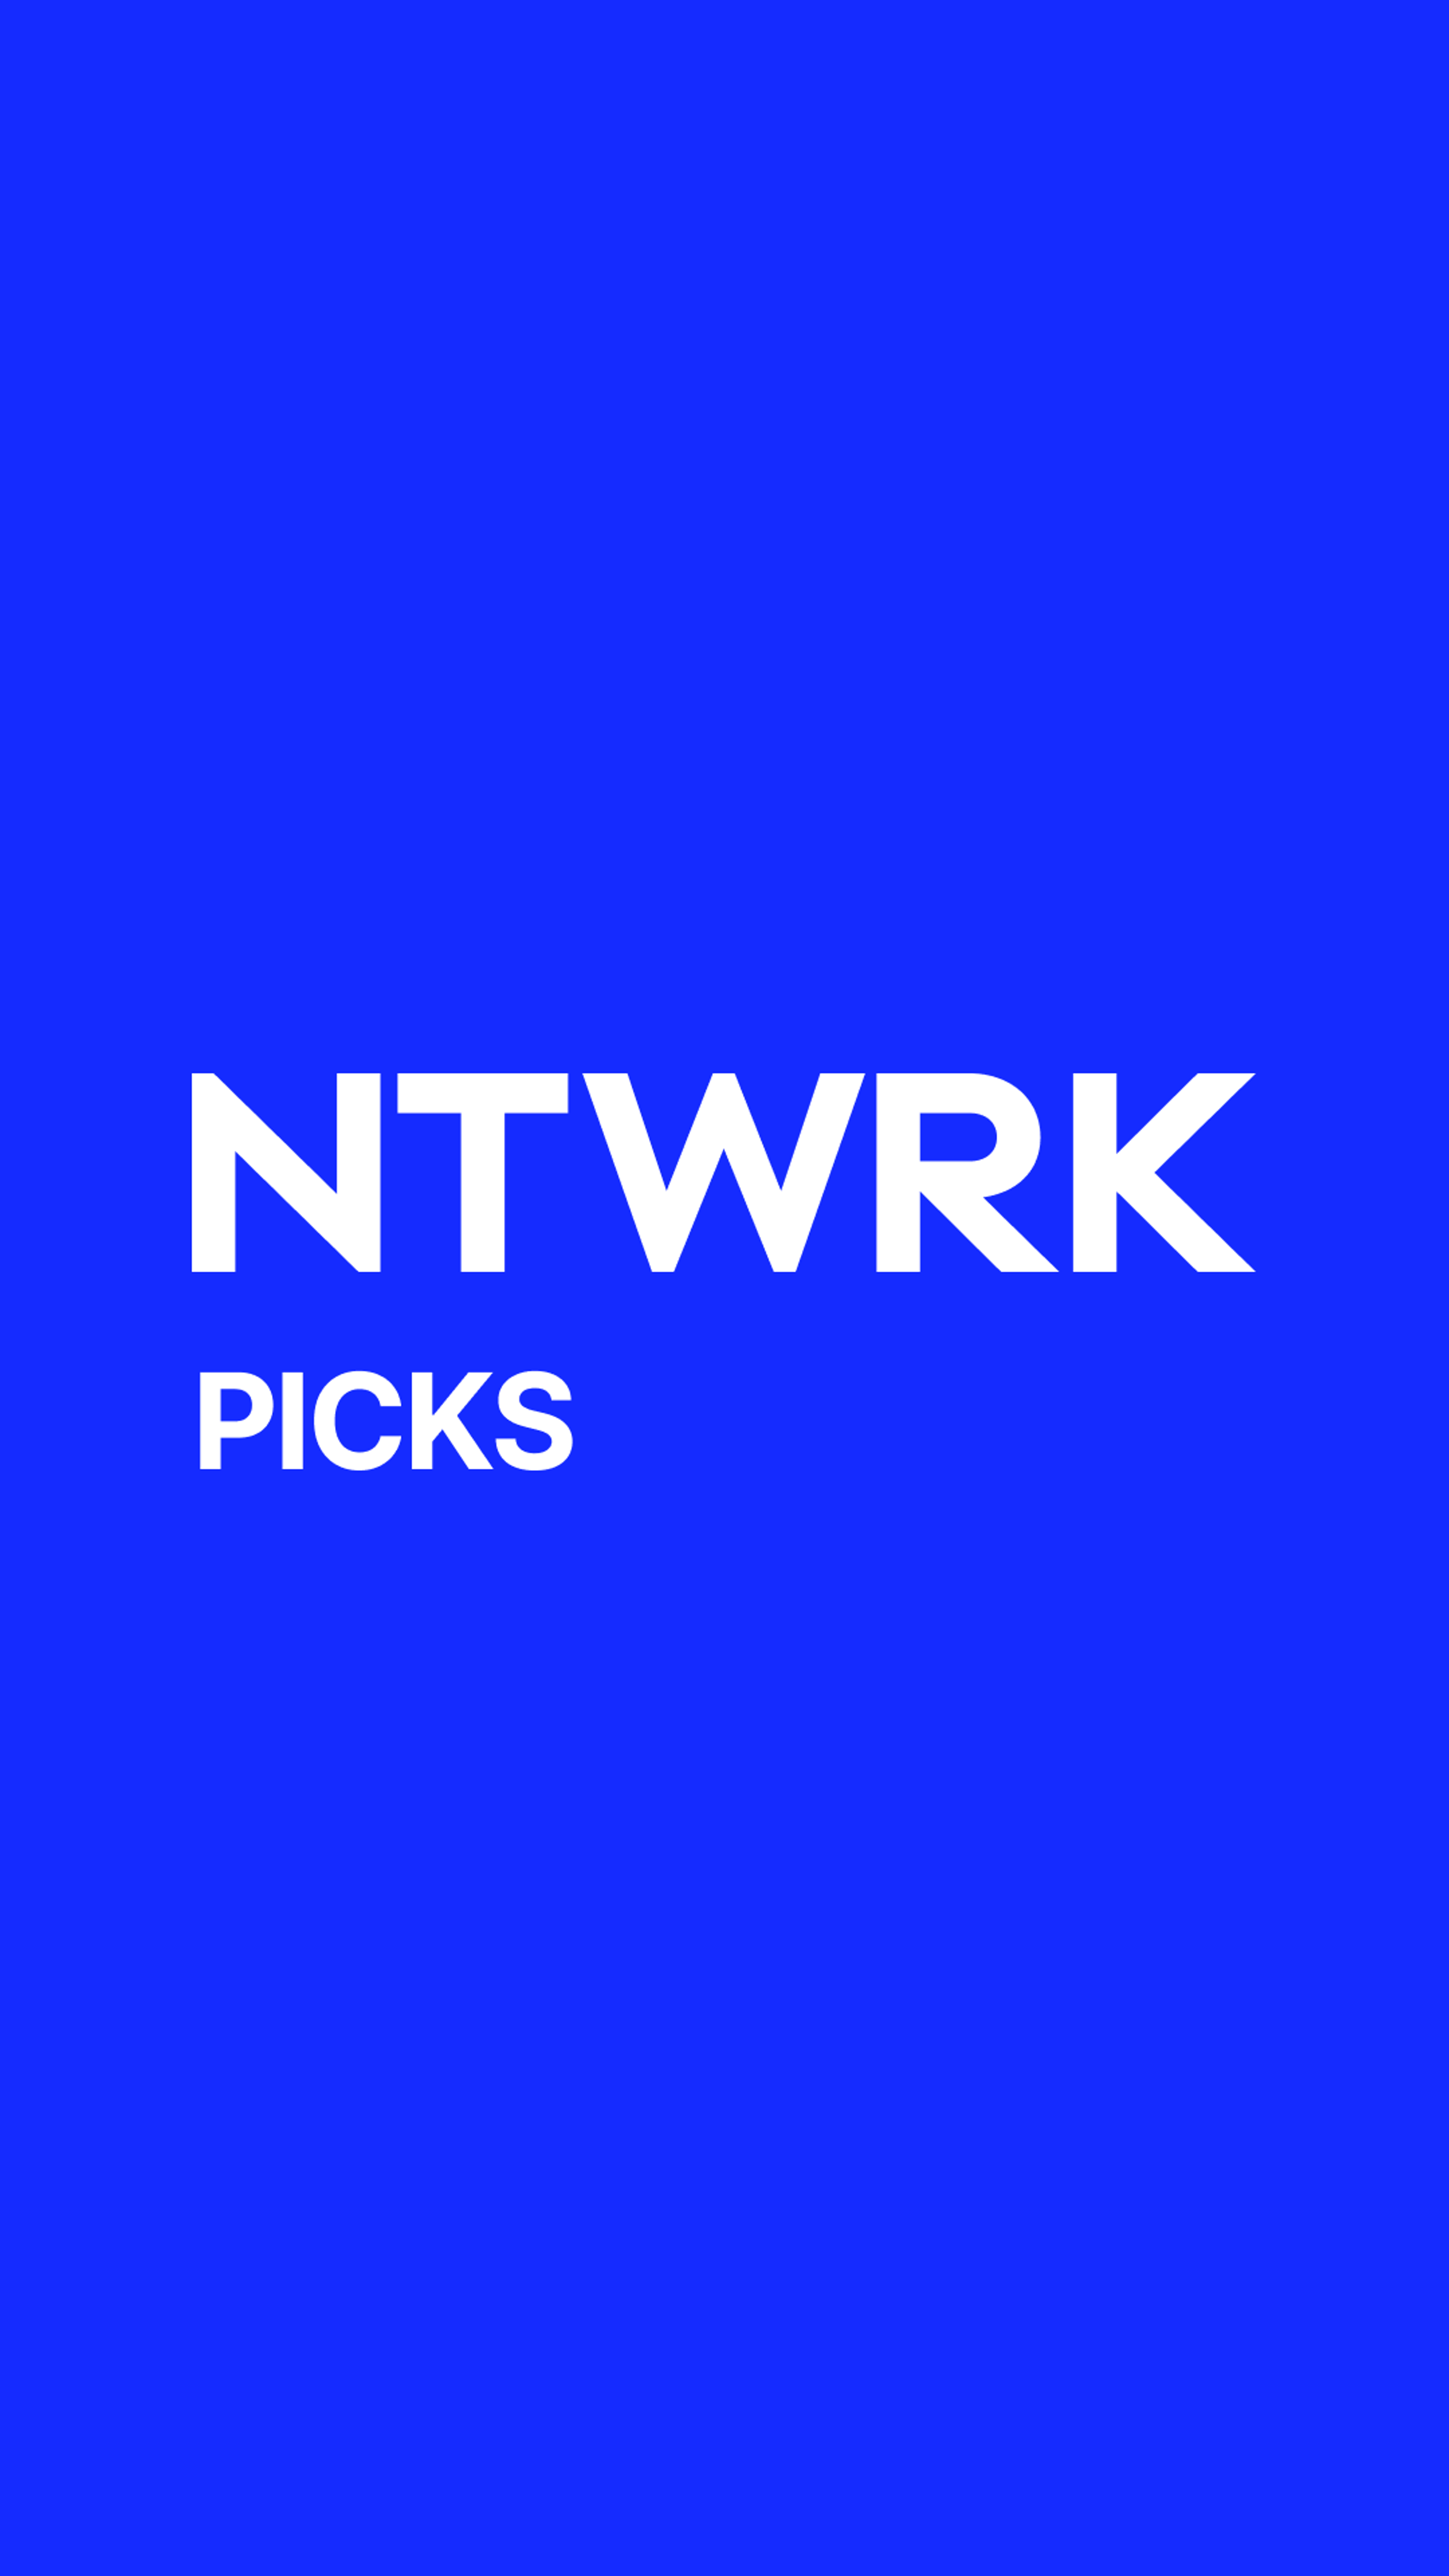 Preview image for the show titled "NTWRK Picks: Sp5der" at Monday, May 13 @ 7:00 PM